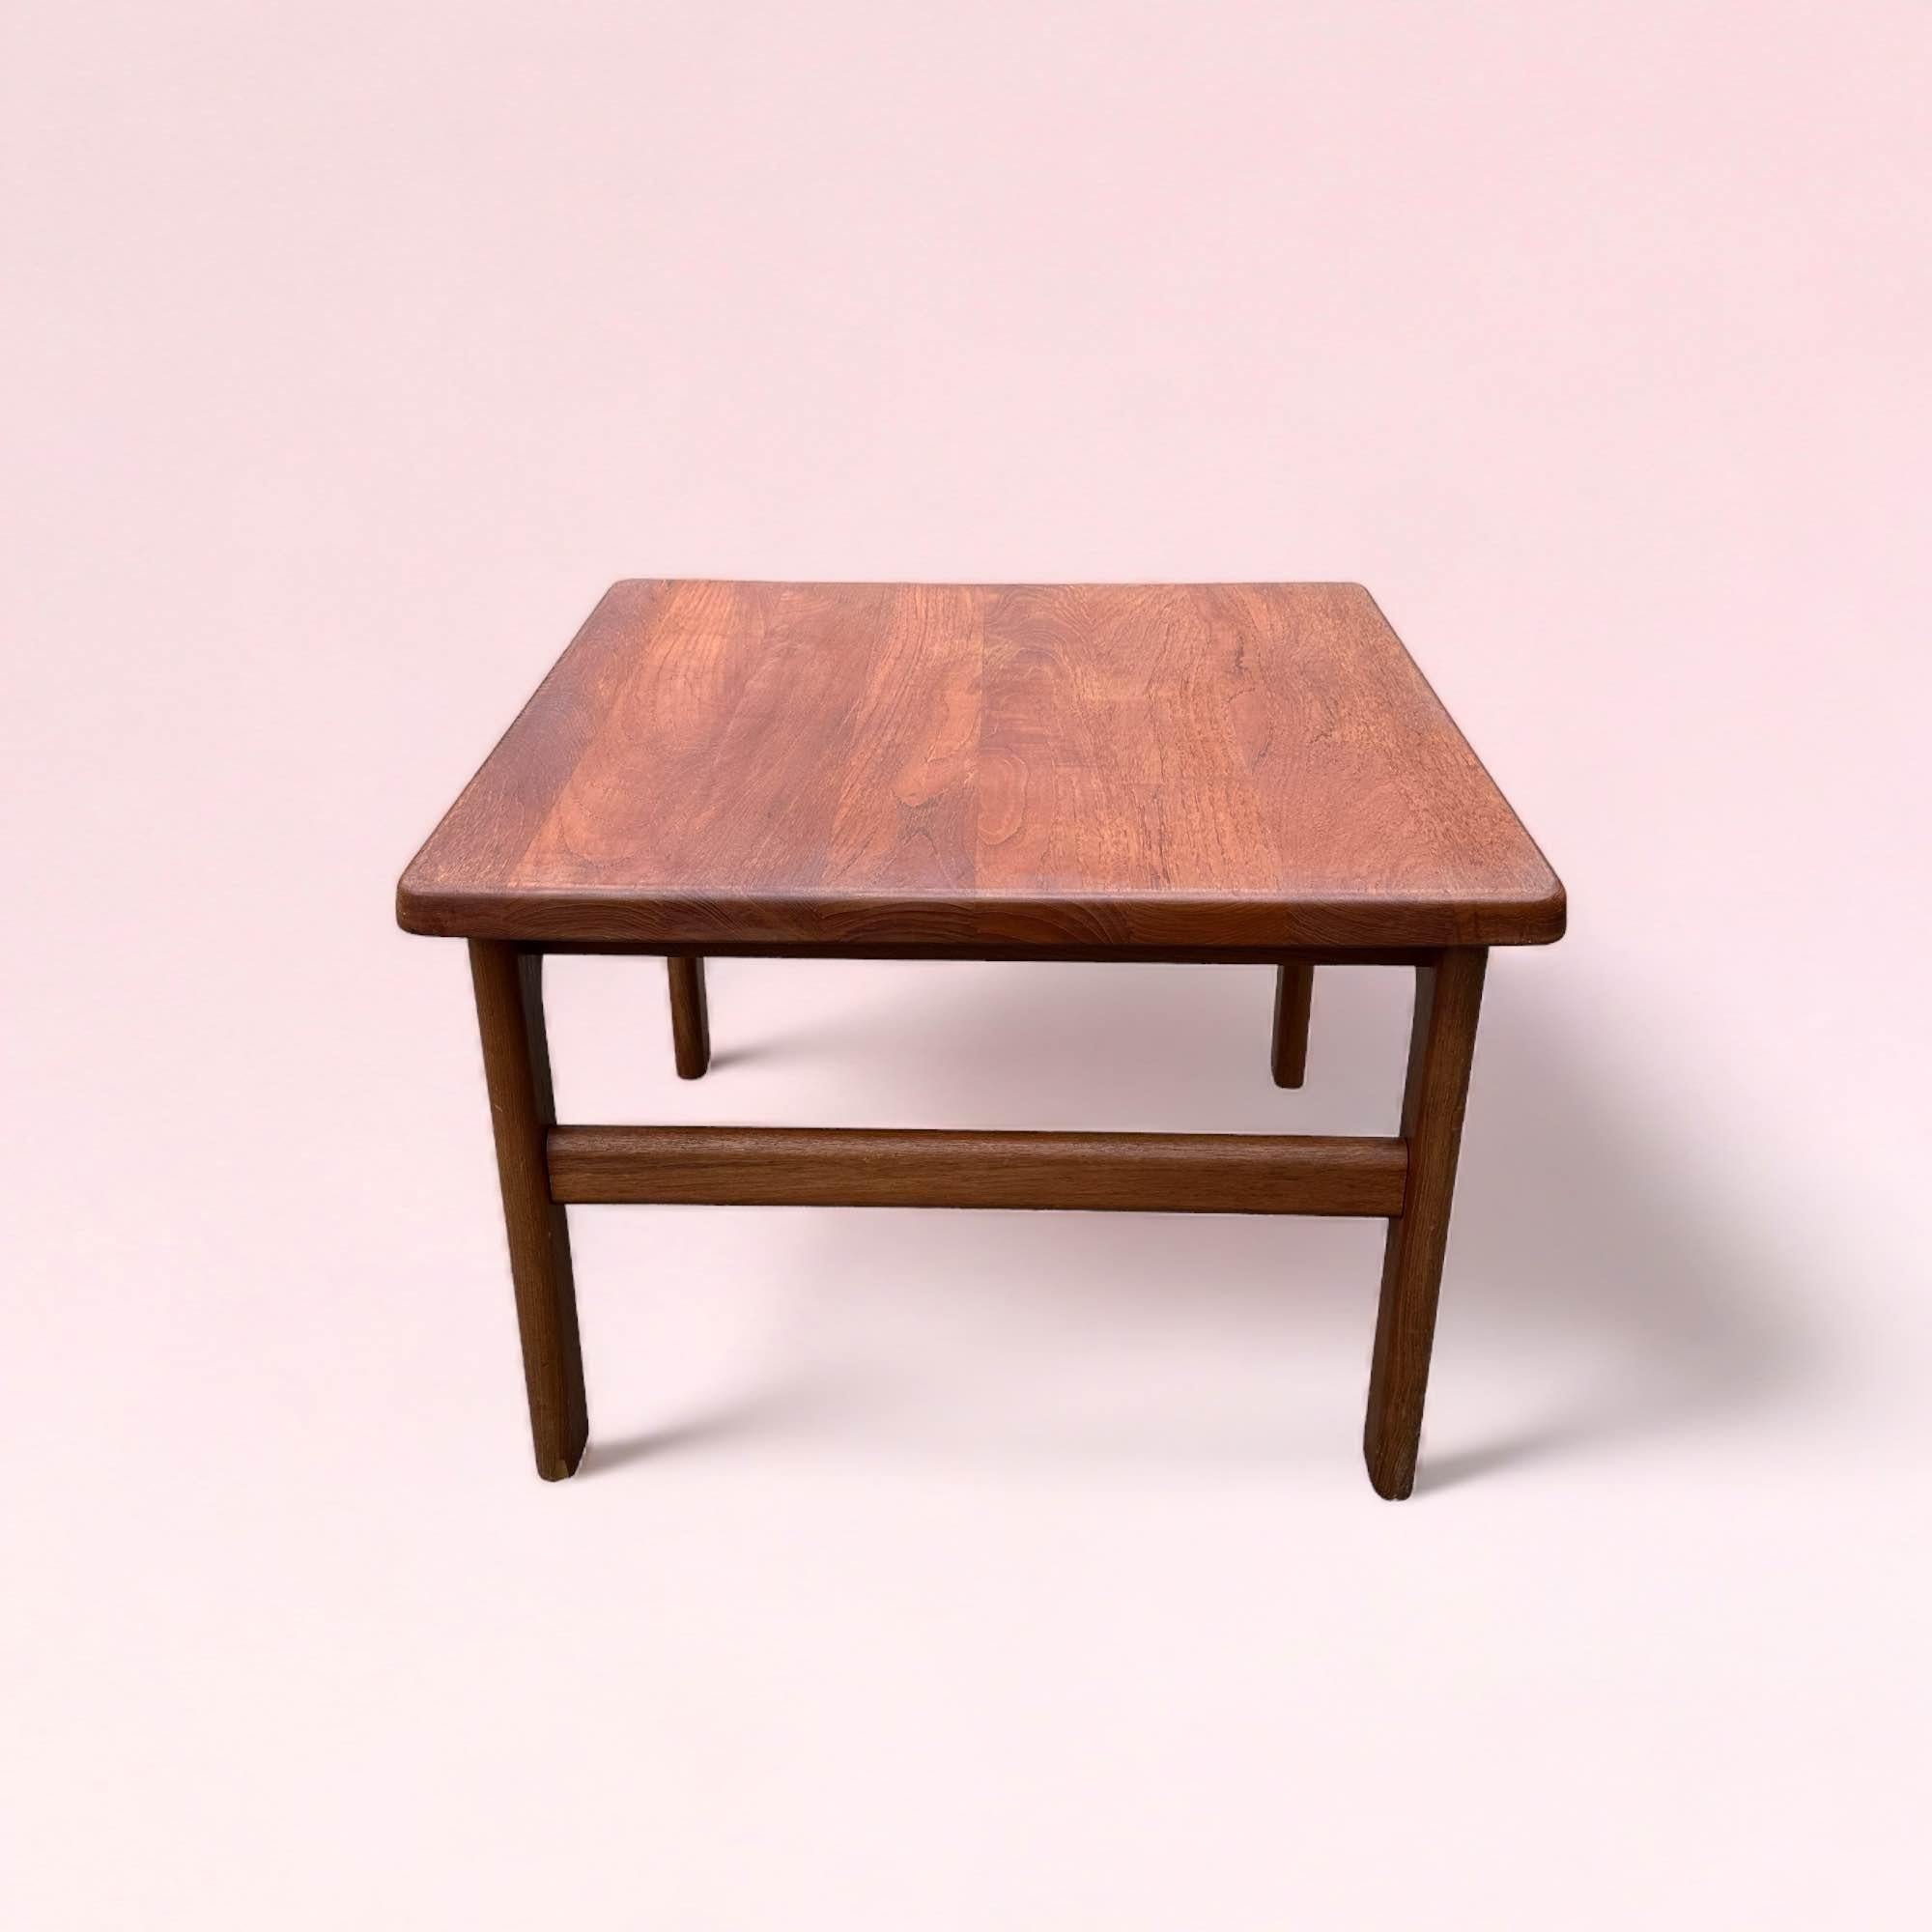 Beautiful wooden coffee table in teak by Niels Bach from the 1960s. With its beautiful, timeless design, this table fits into any interior. The table shows minimal signs of use, there is only a small piece of one of the legs at the bottom (see